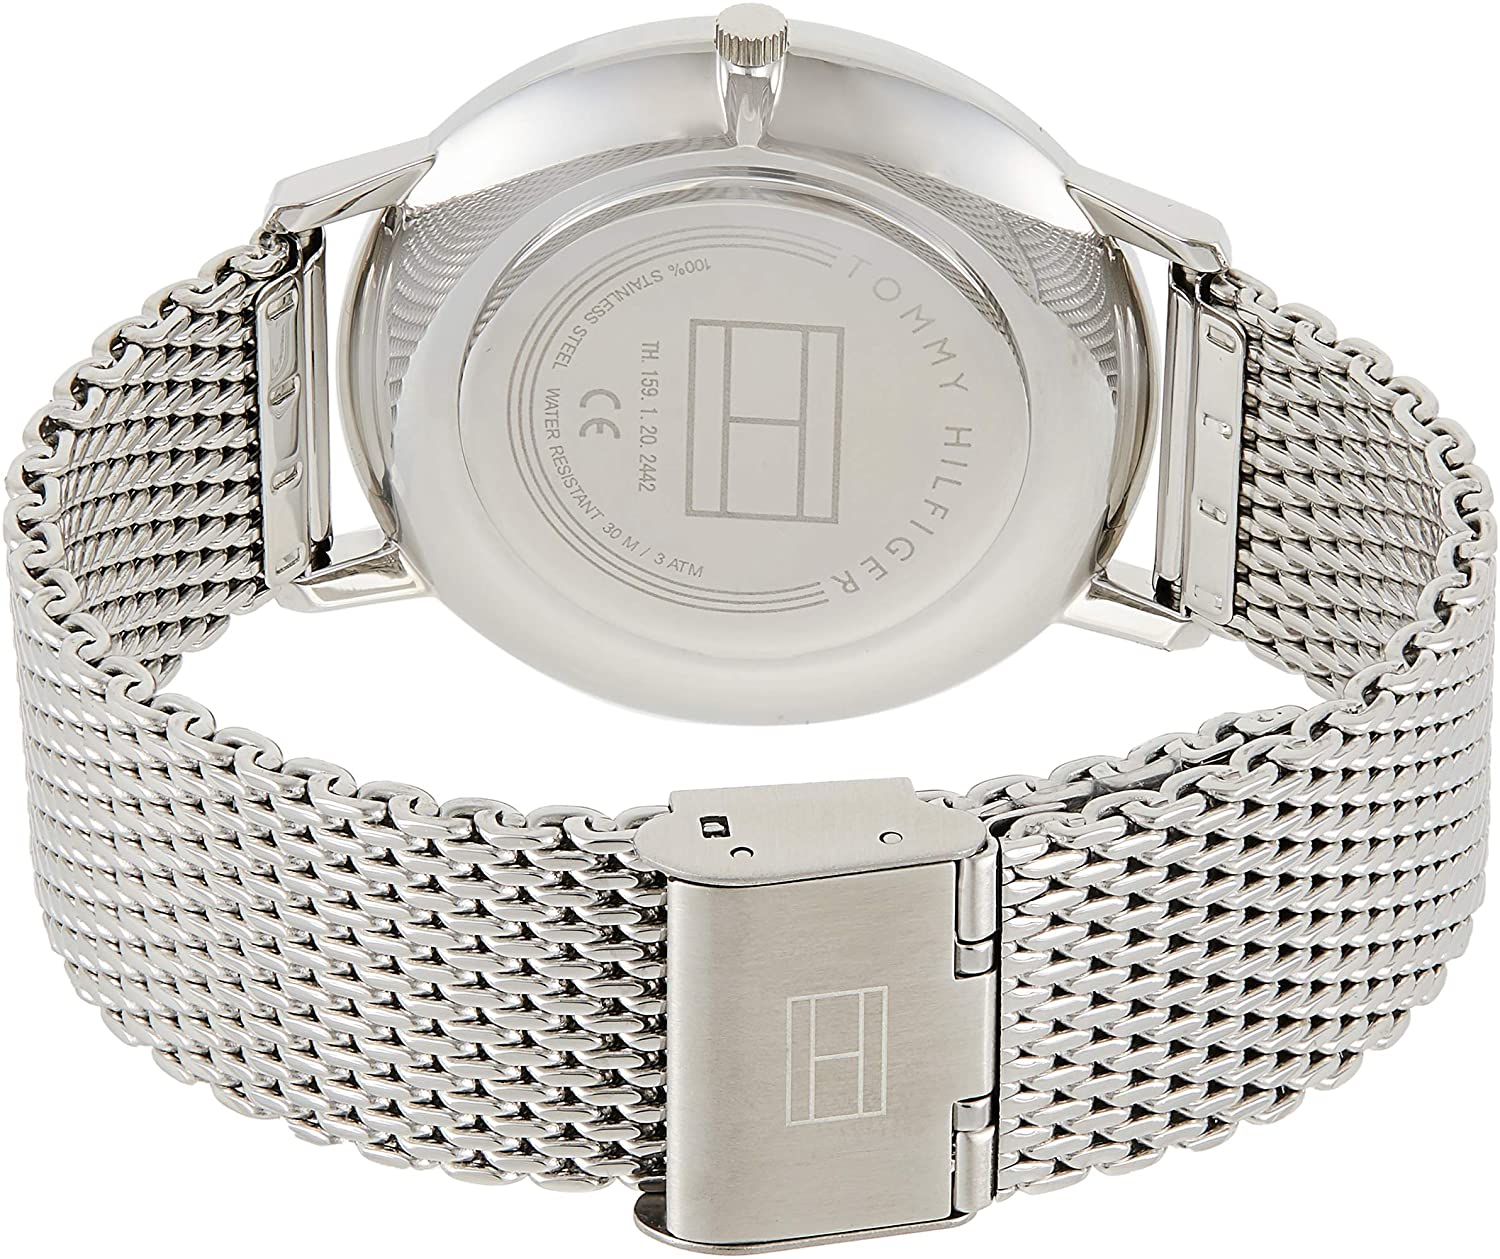 Tommy Hilfiger Men's Quartz Watch with Stainless Steel Strap, Silver, 20 (Model: 1791512)